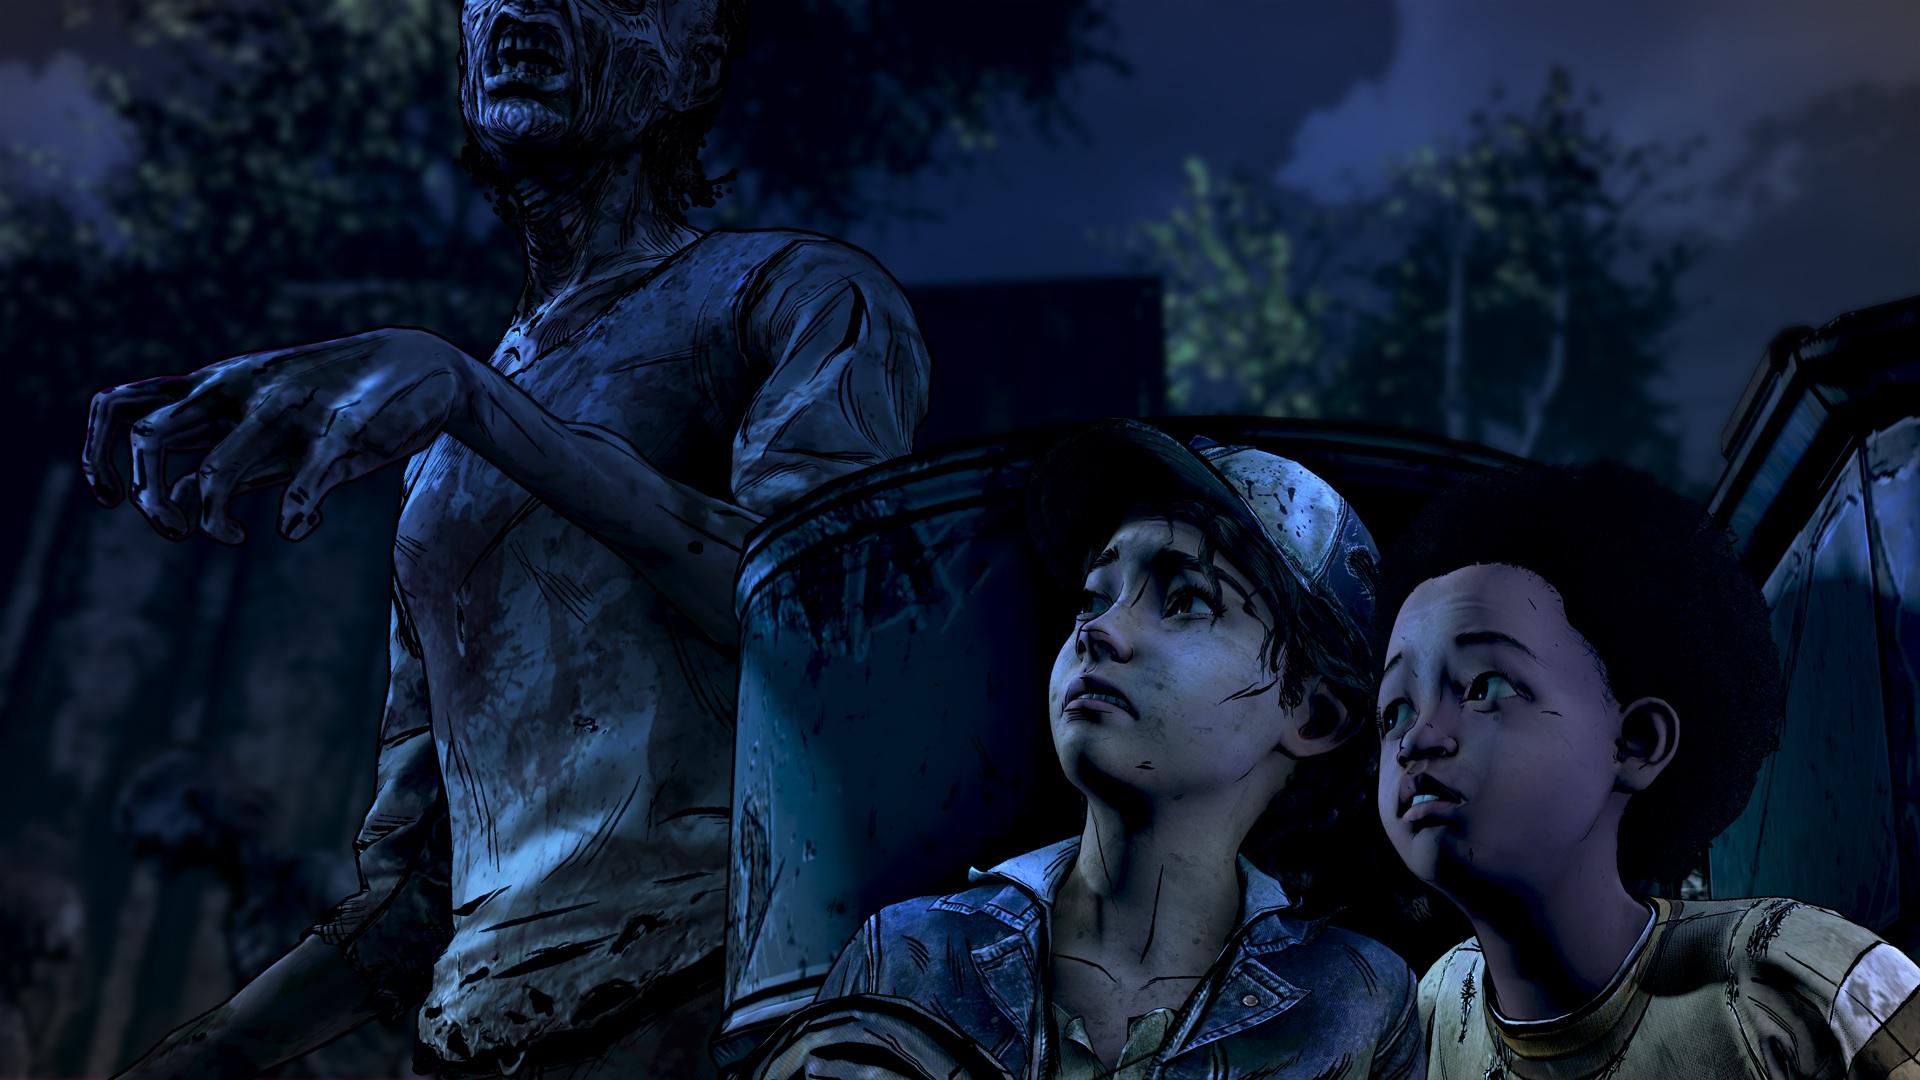 Netflix to partner up with Telltale Games to bolster its